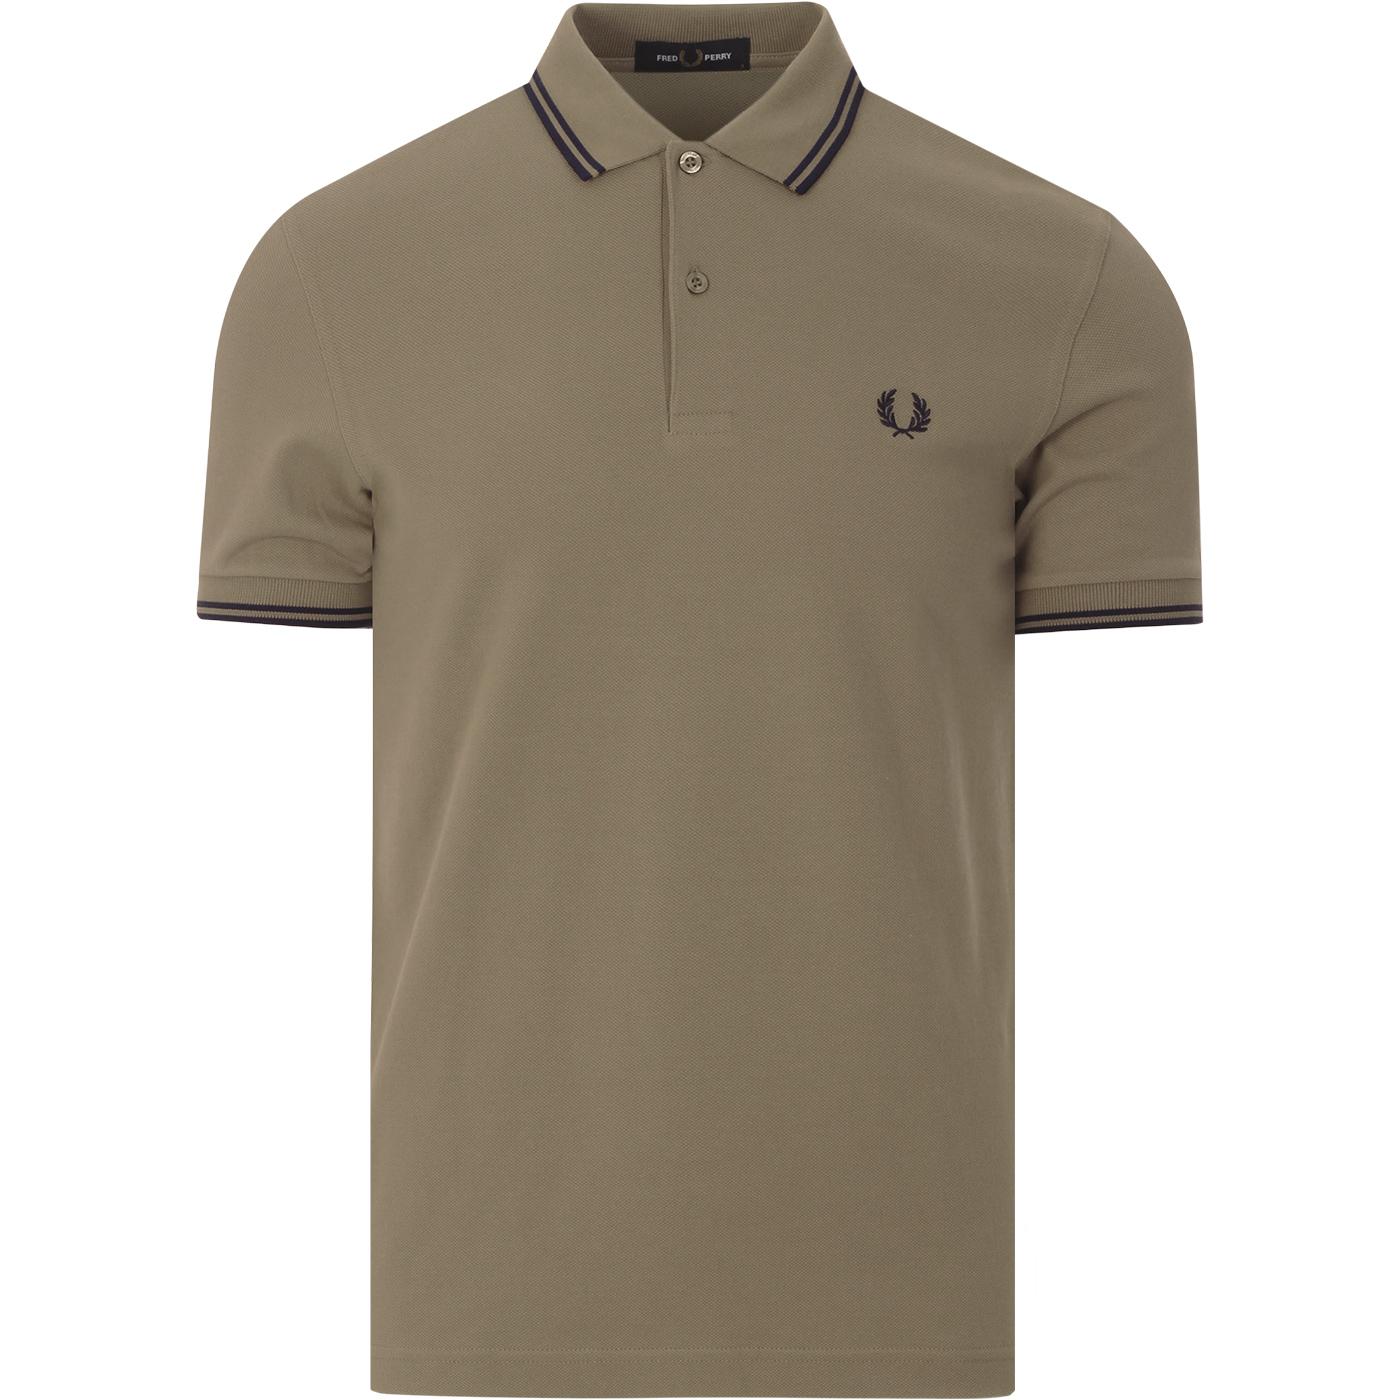 FRED PERRY M3600 Twin Tipped Mod Polo Shirt (Sage)